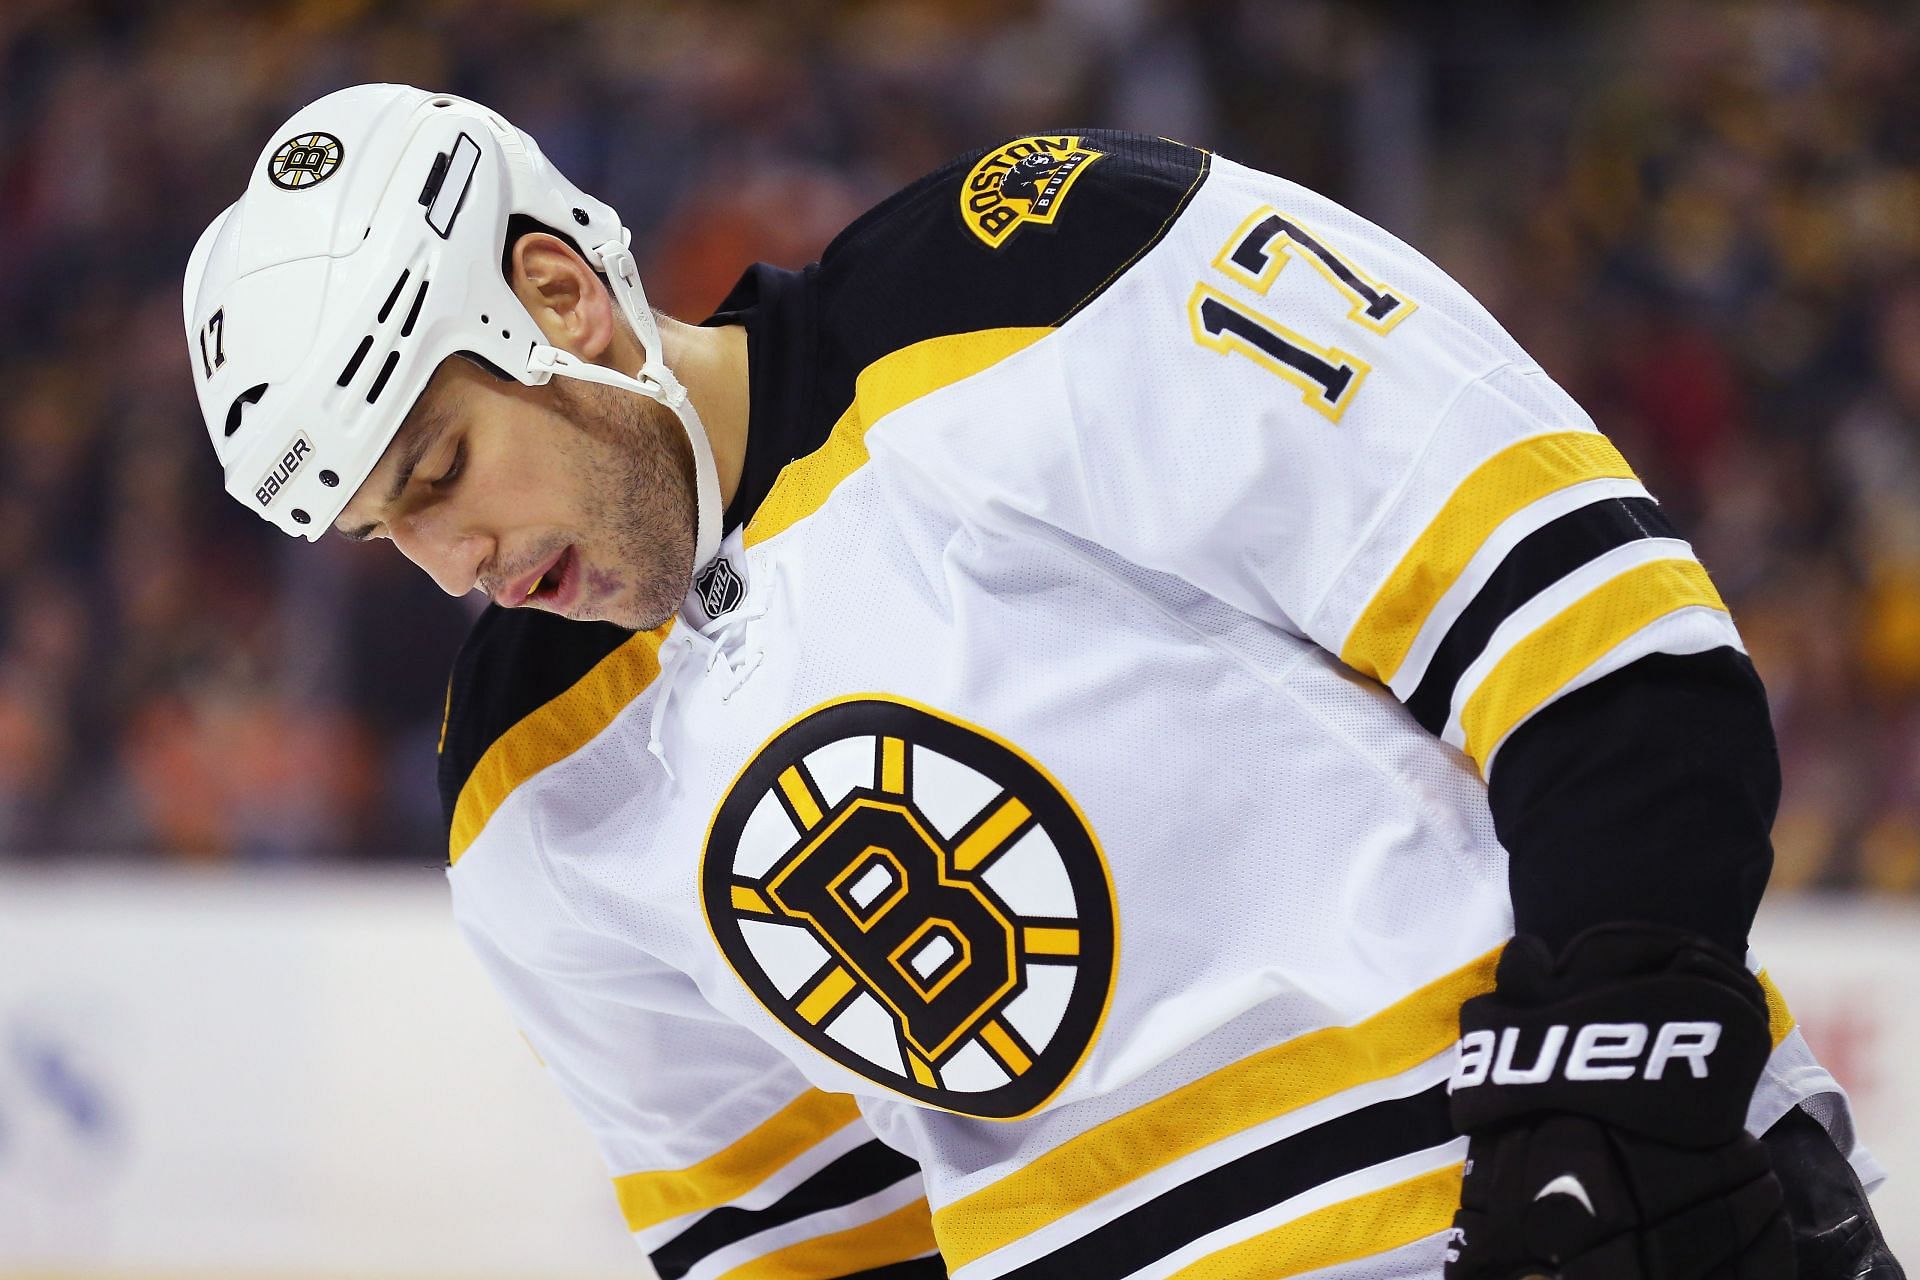 Loooch!' heads back to Boston to re-join Bruins